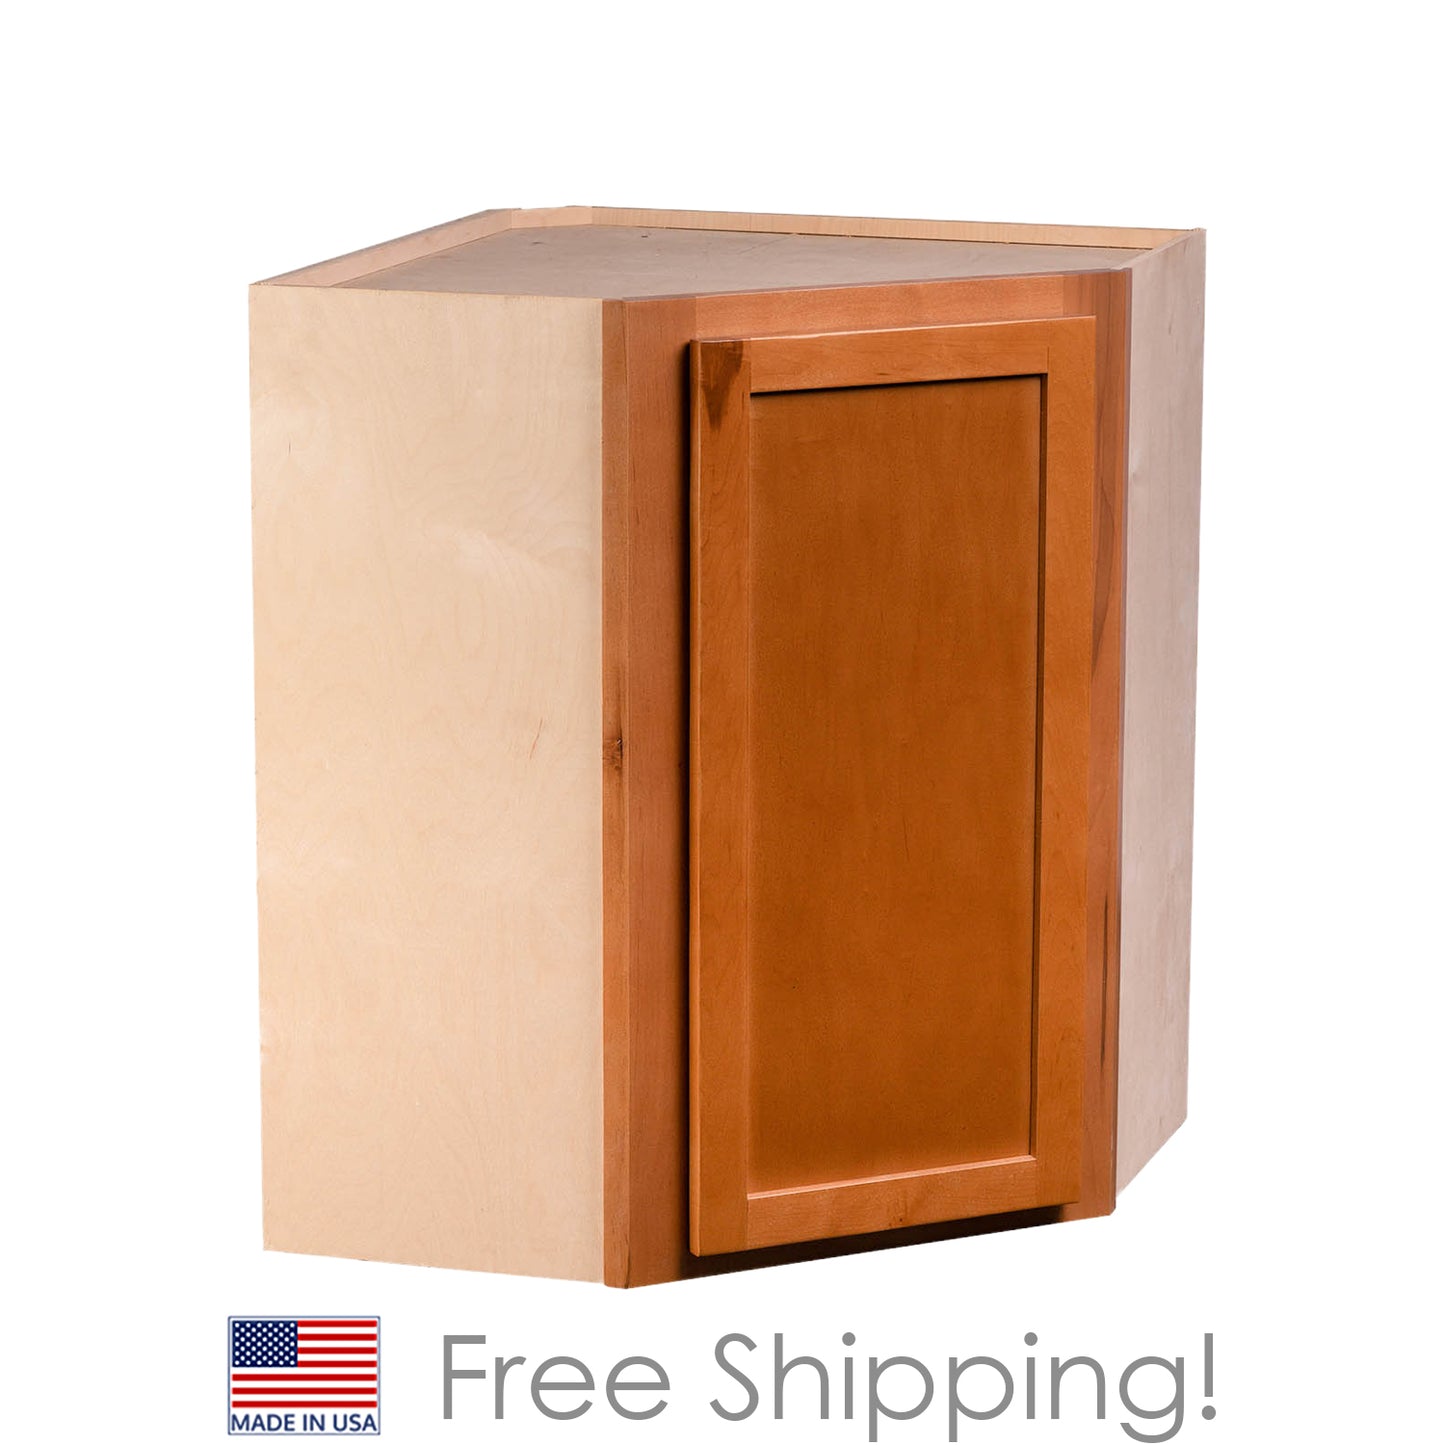 Quicklock RTA (Ready-to-Assemble) Provincial Stain 24"WX36"HX12"D Wall Corner Cabinet